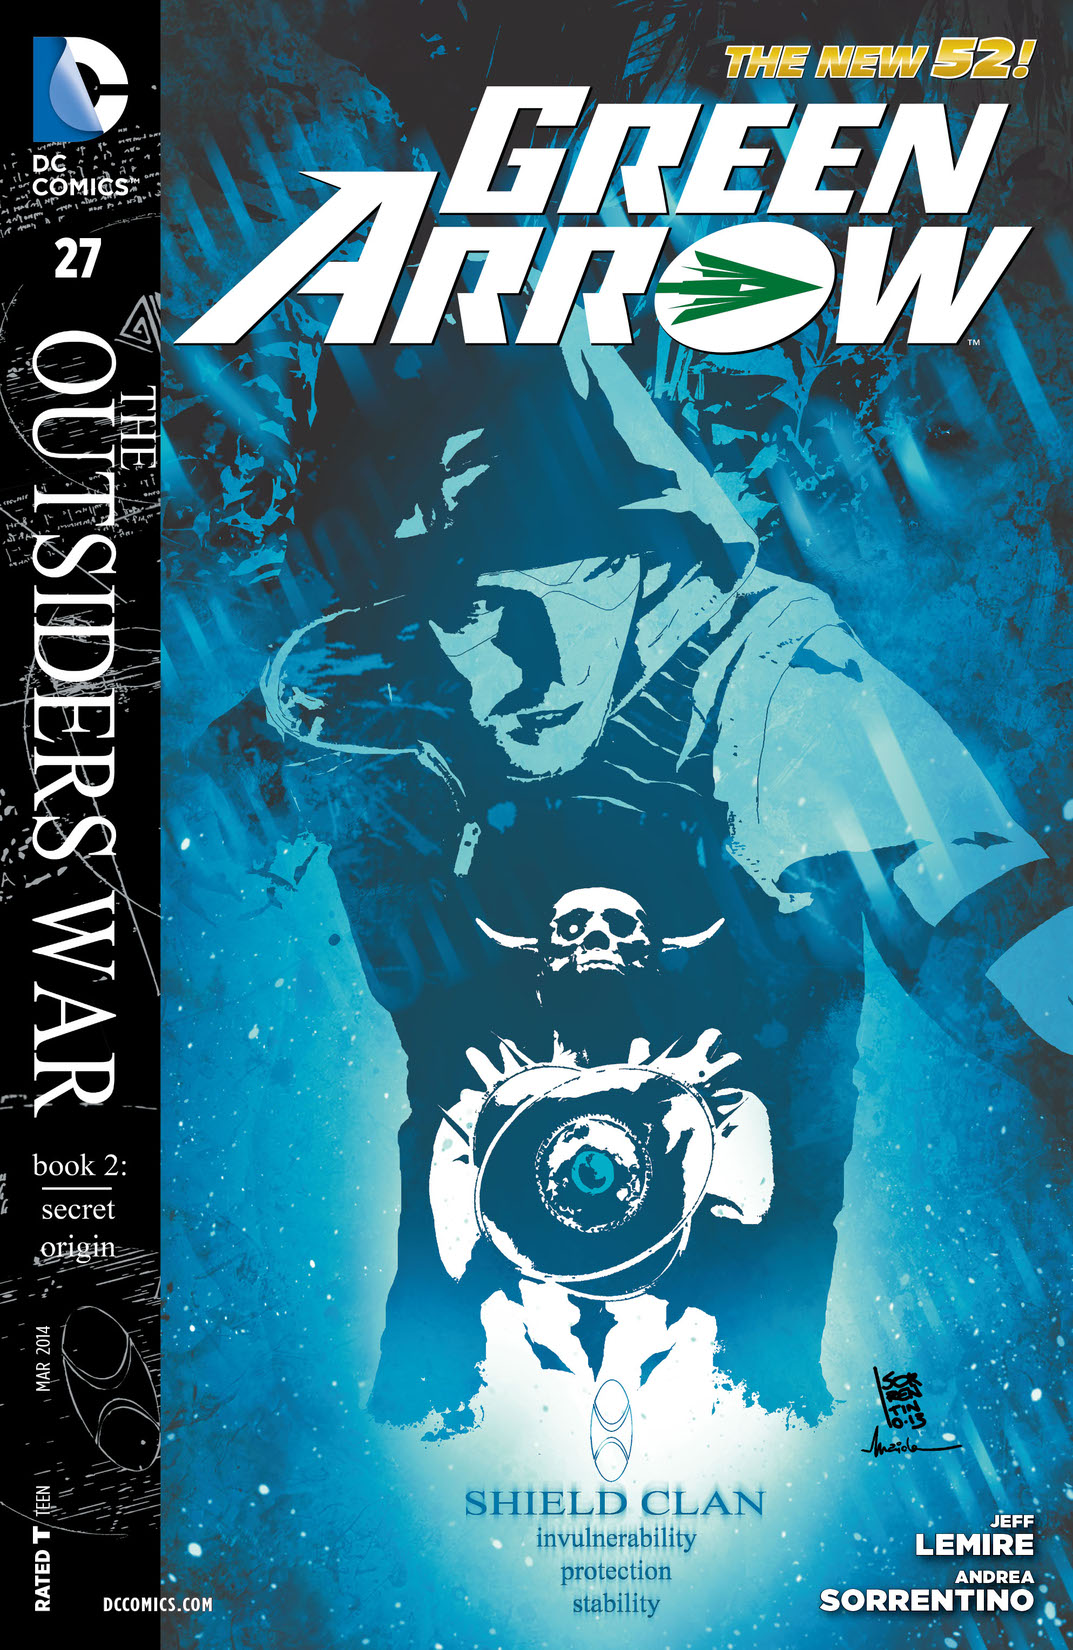 Green Arrow (2011-) #27 preview images